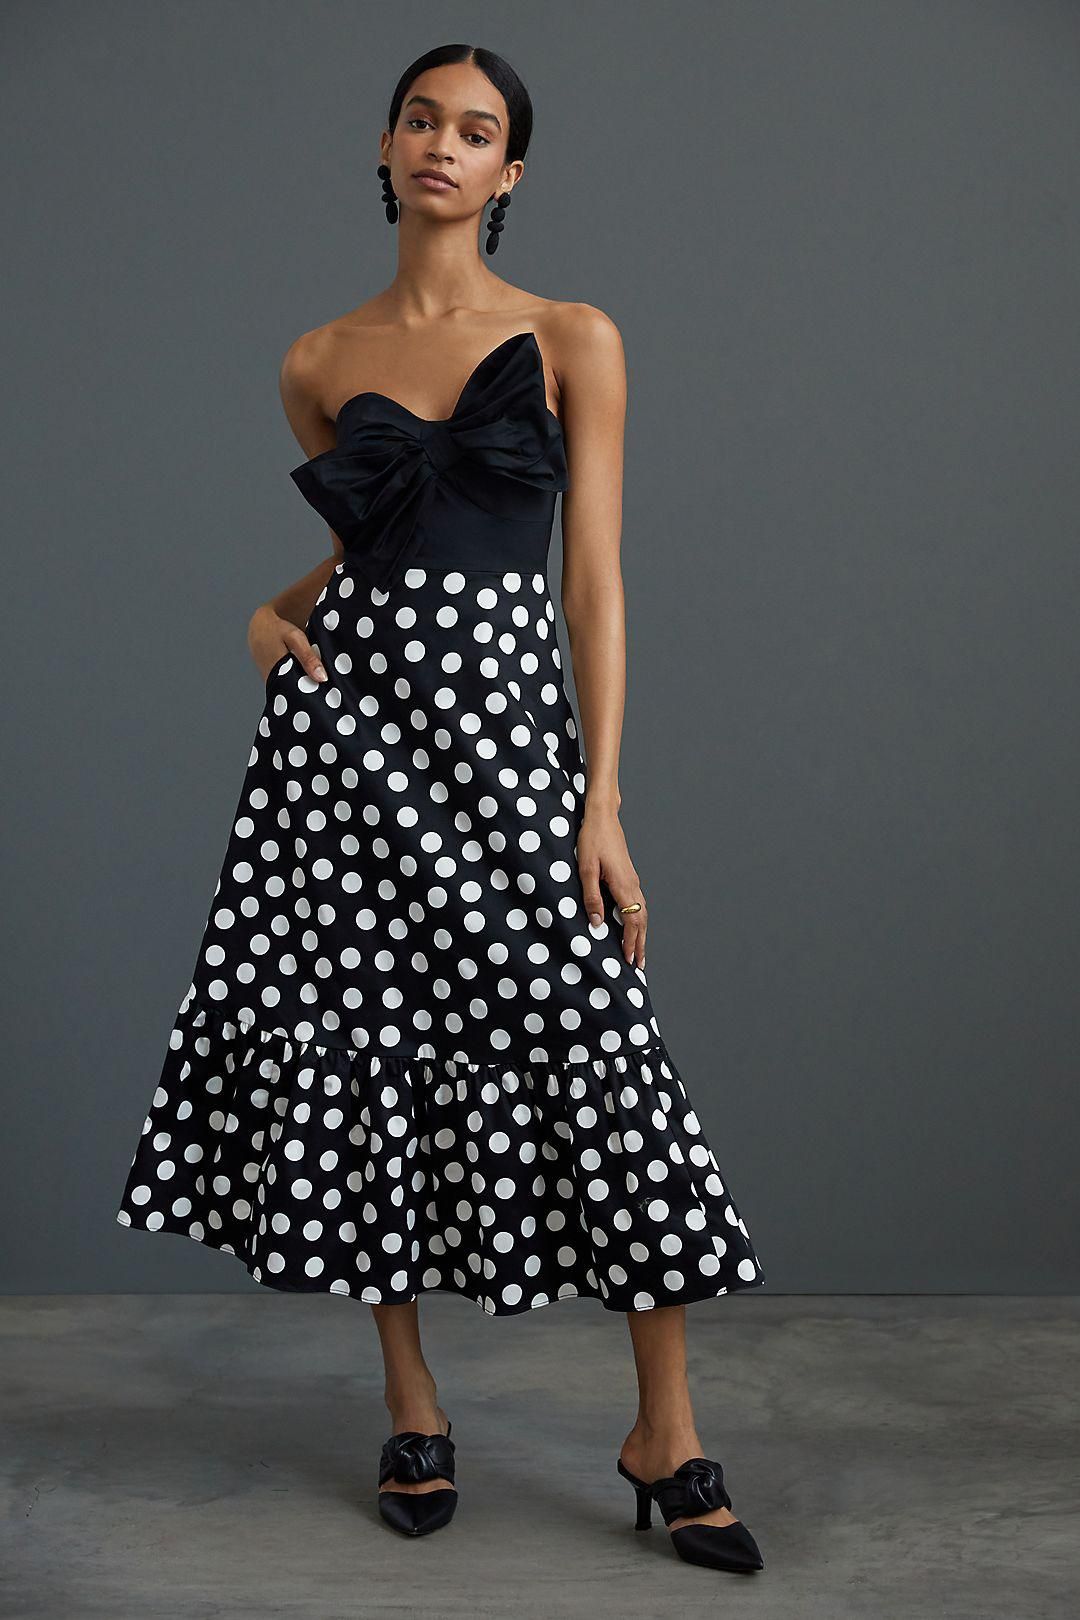 strapless dress with bow and polka dots